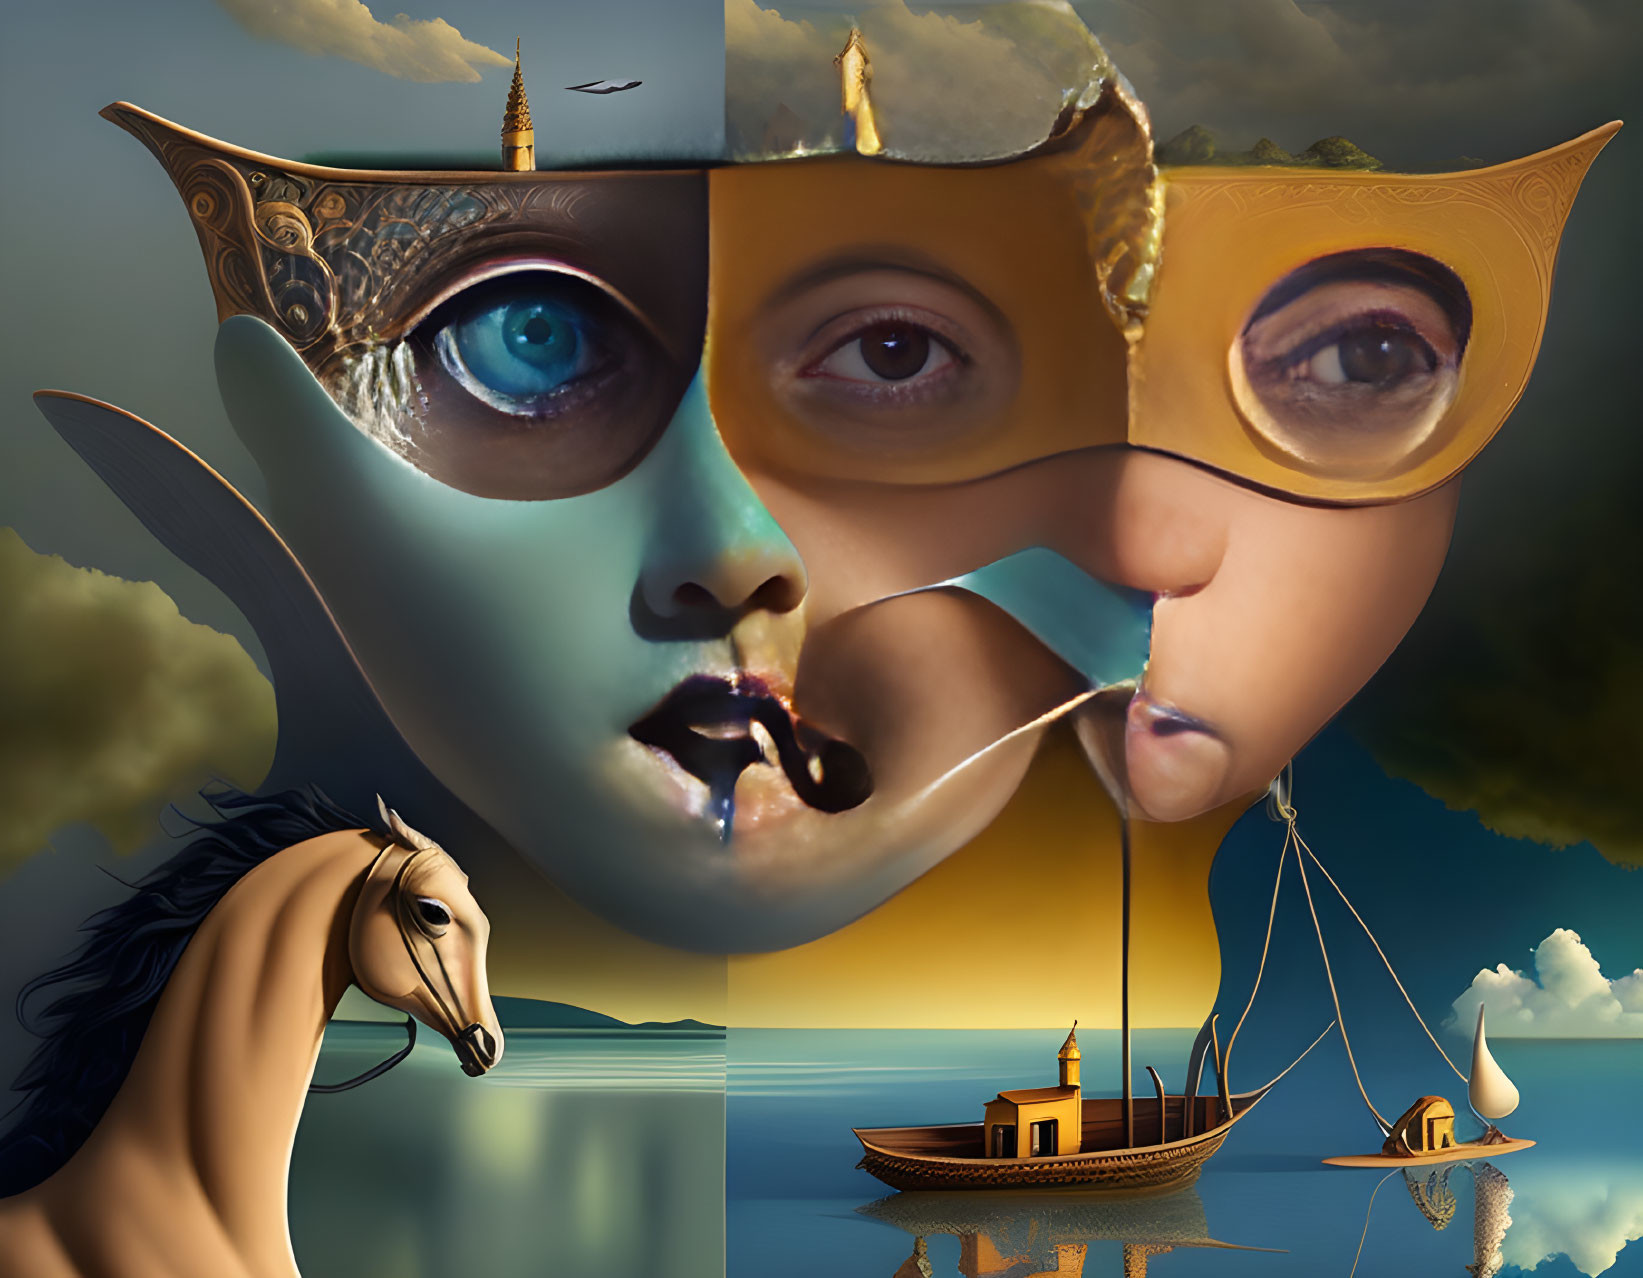 Surreal composite image: fragmented faces, masks, horse, boats on tranquil waters, cloudy sky